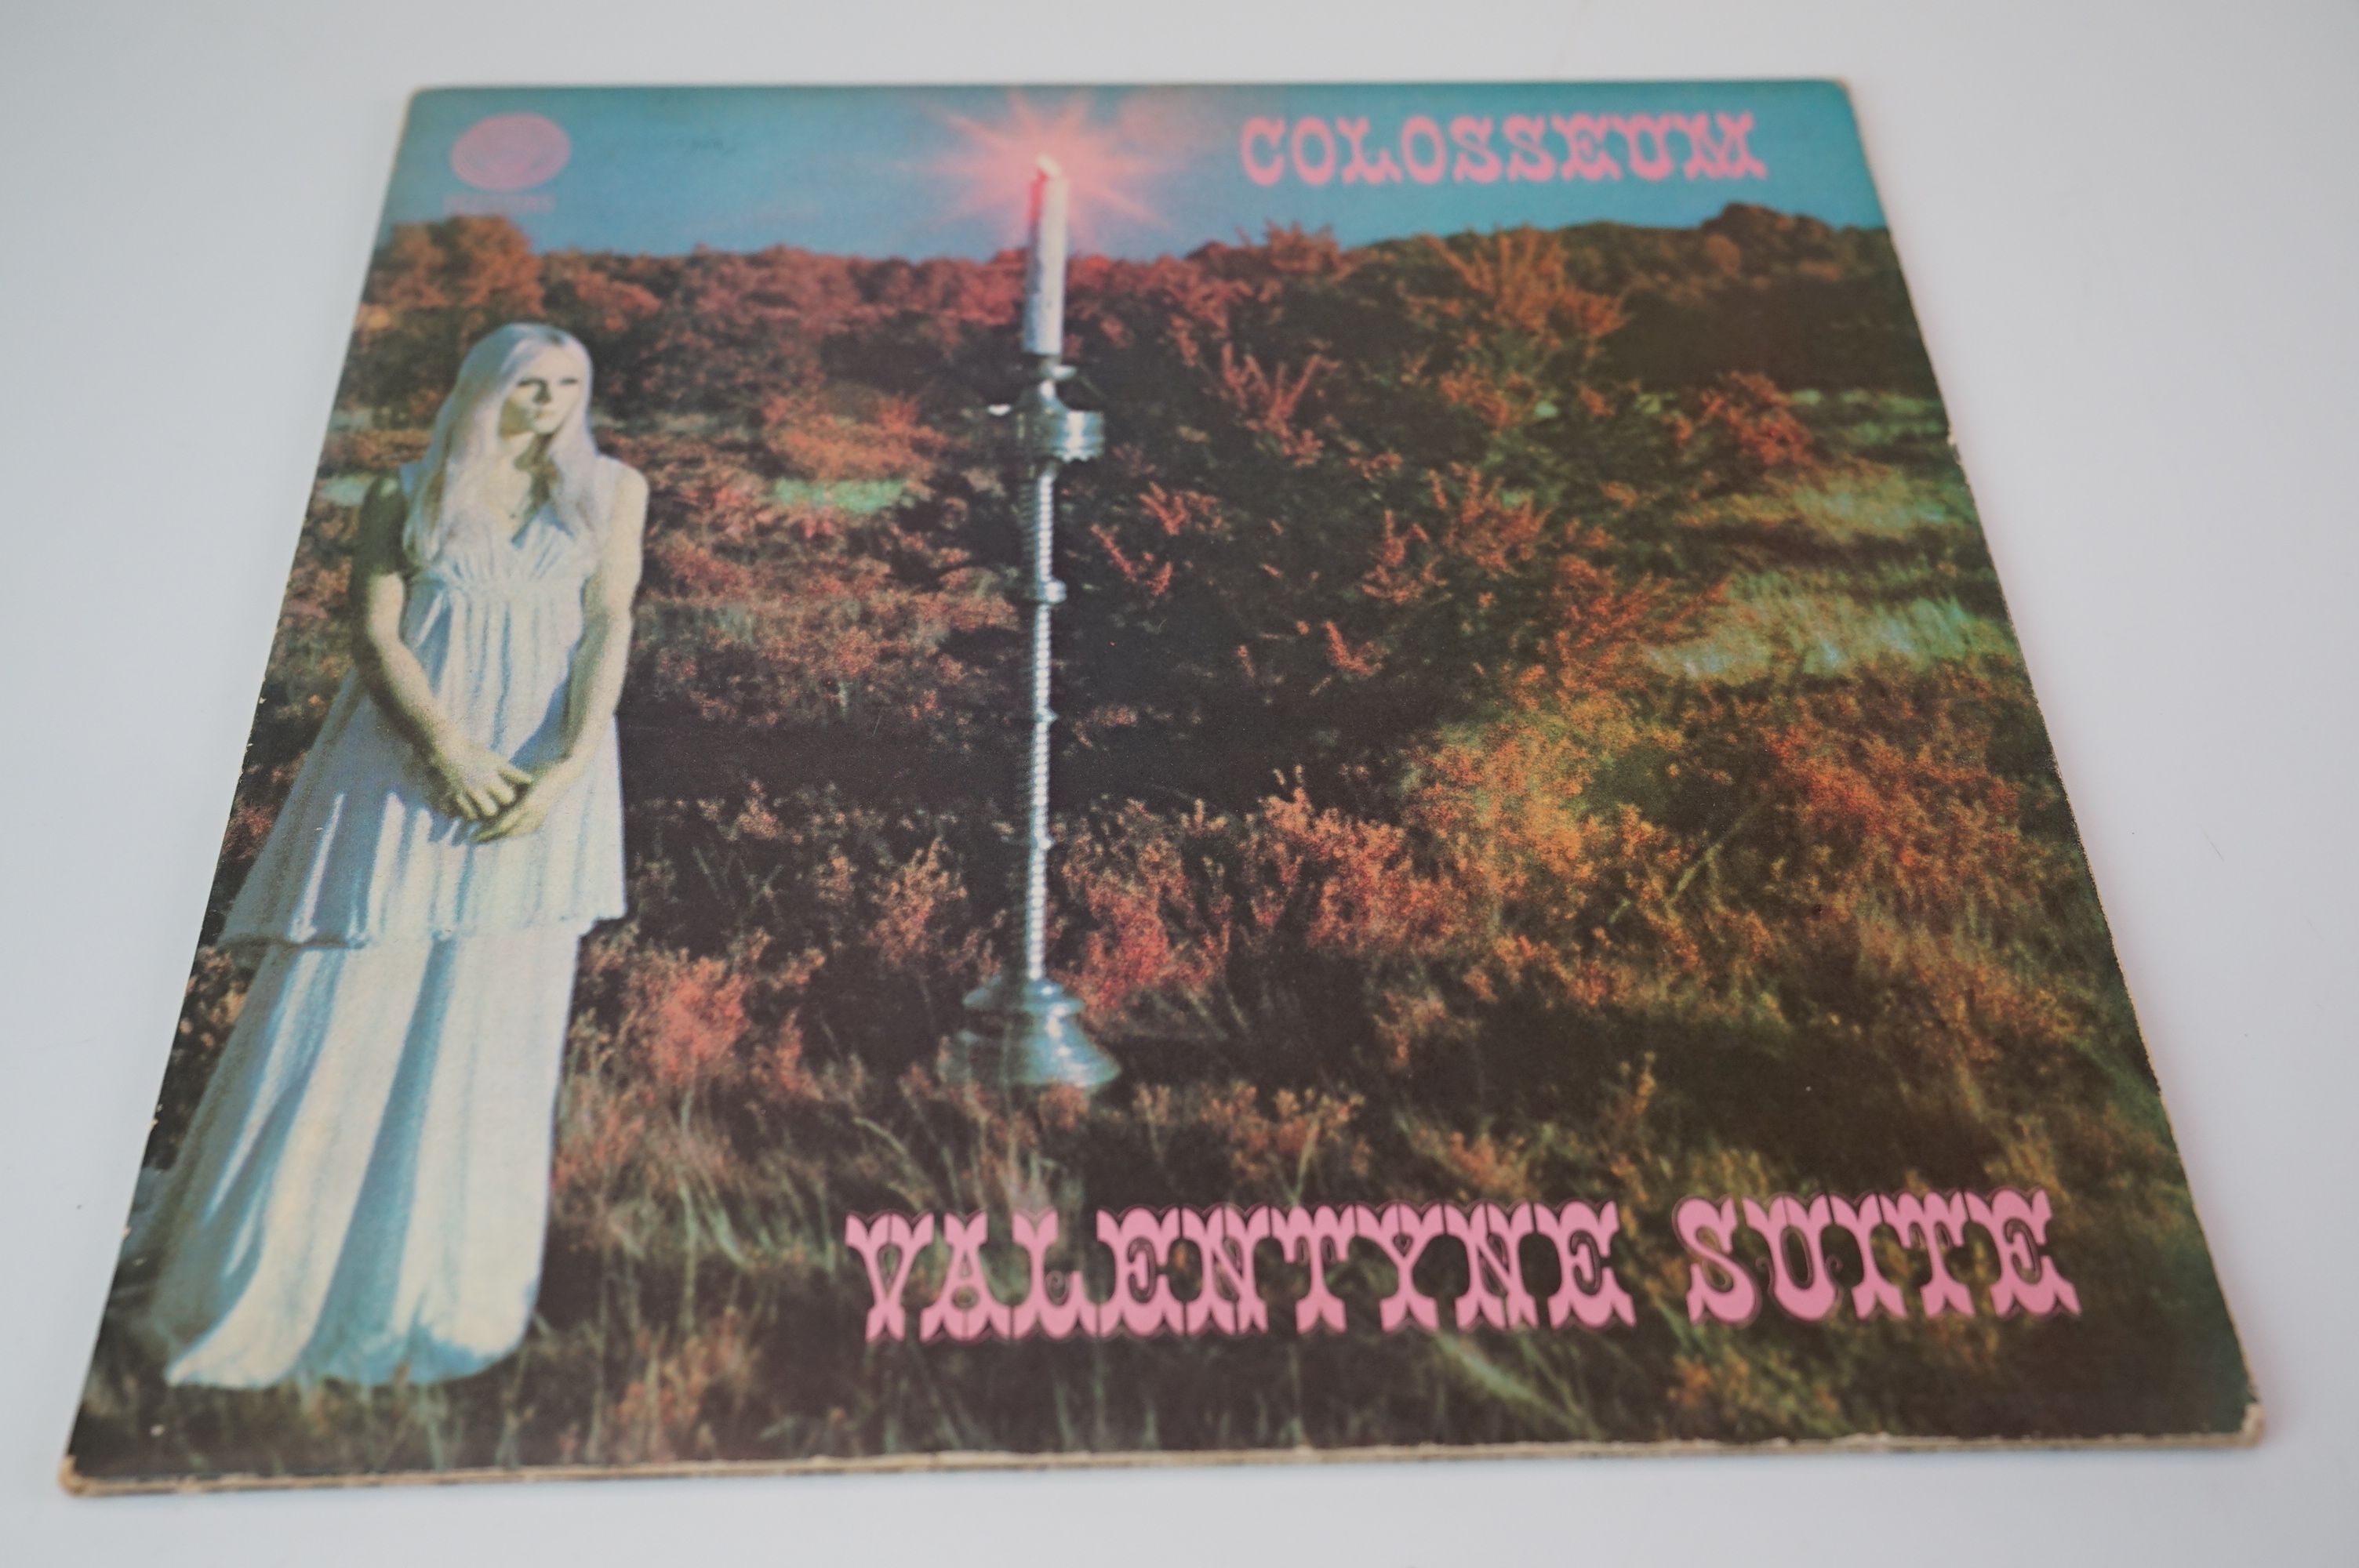 Vinyl - Colosseum Valentyne Suite (VO 1) First press large swirl label with A Philips Record